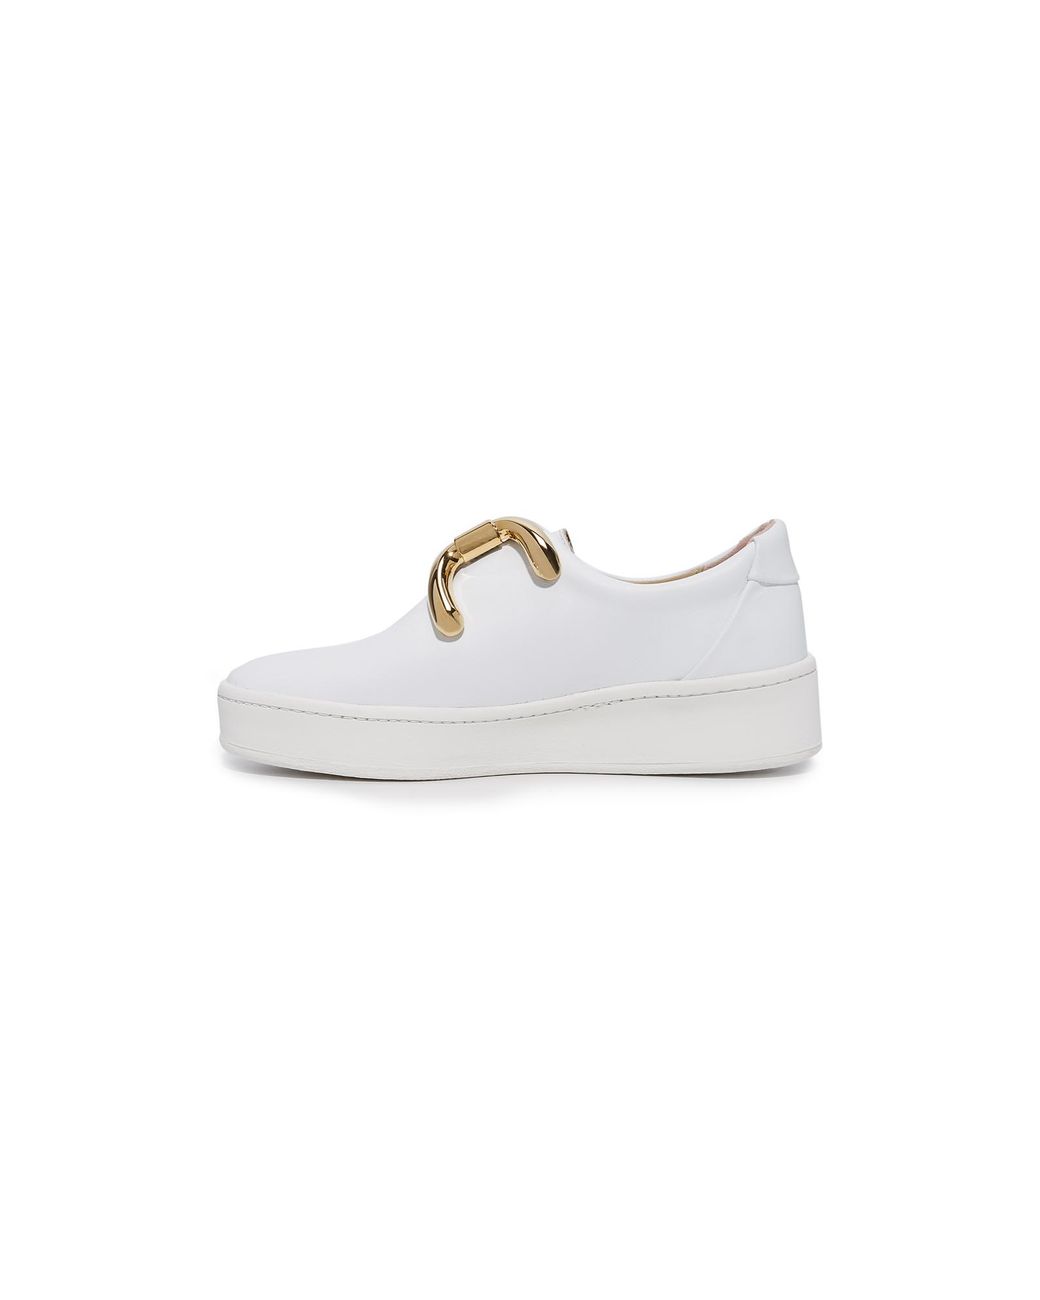 An Hour And A Shower Knot Sneakers in White | Lyst